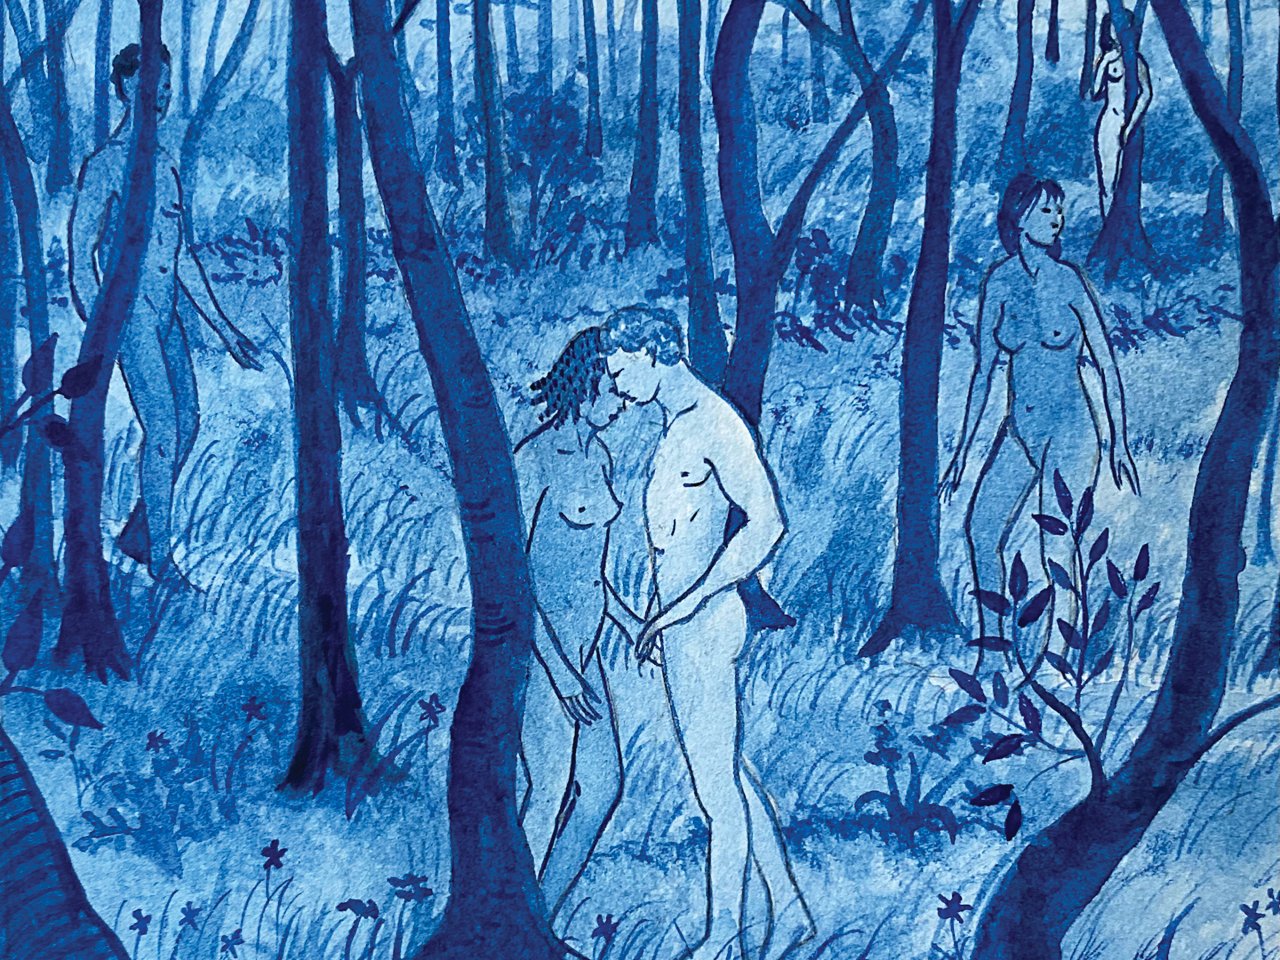 An illustration of a man and woman kissing nude in the forest